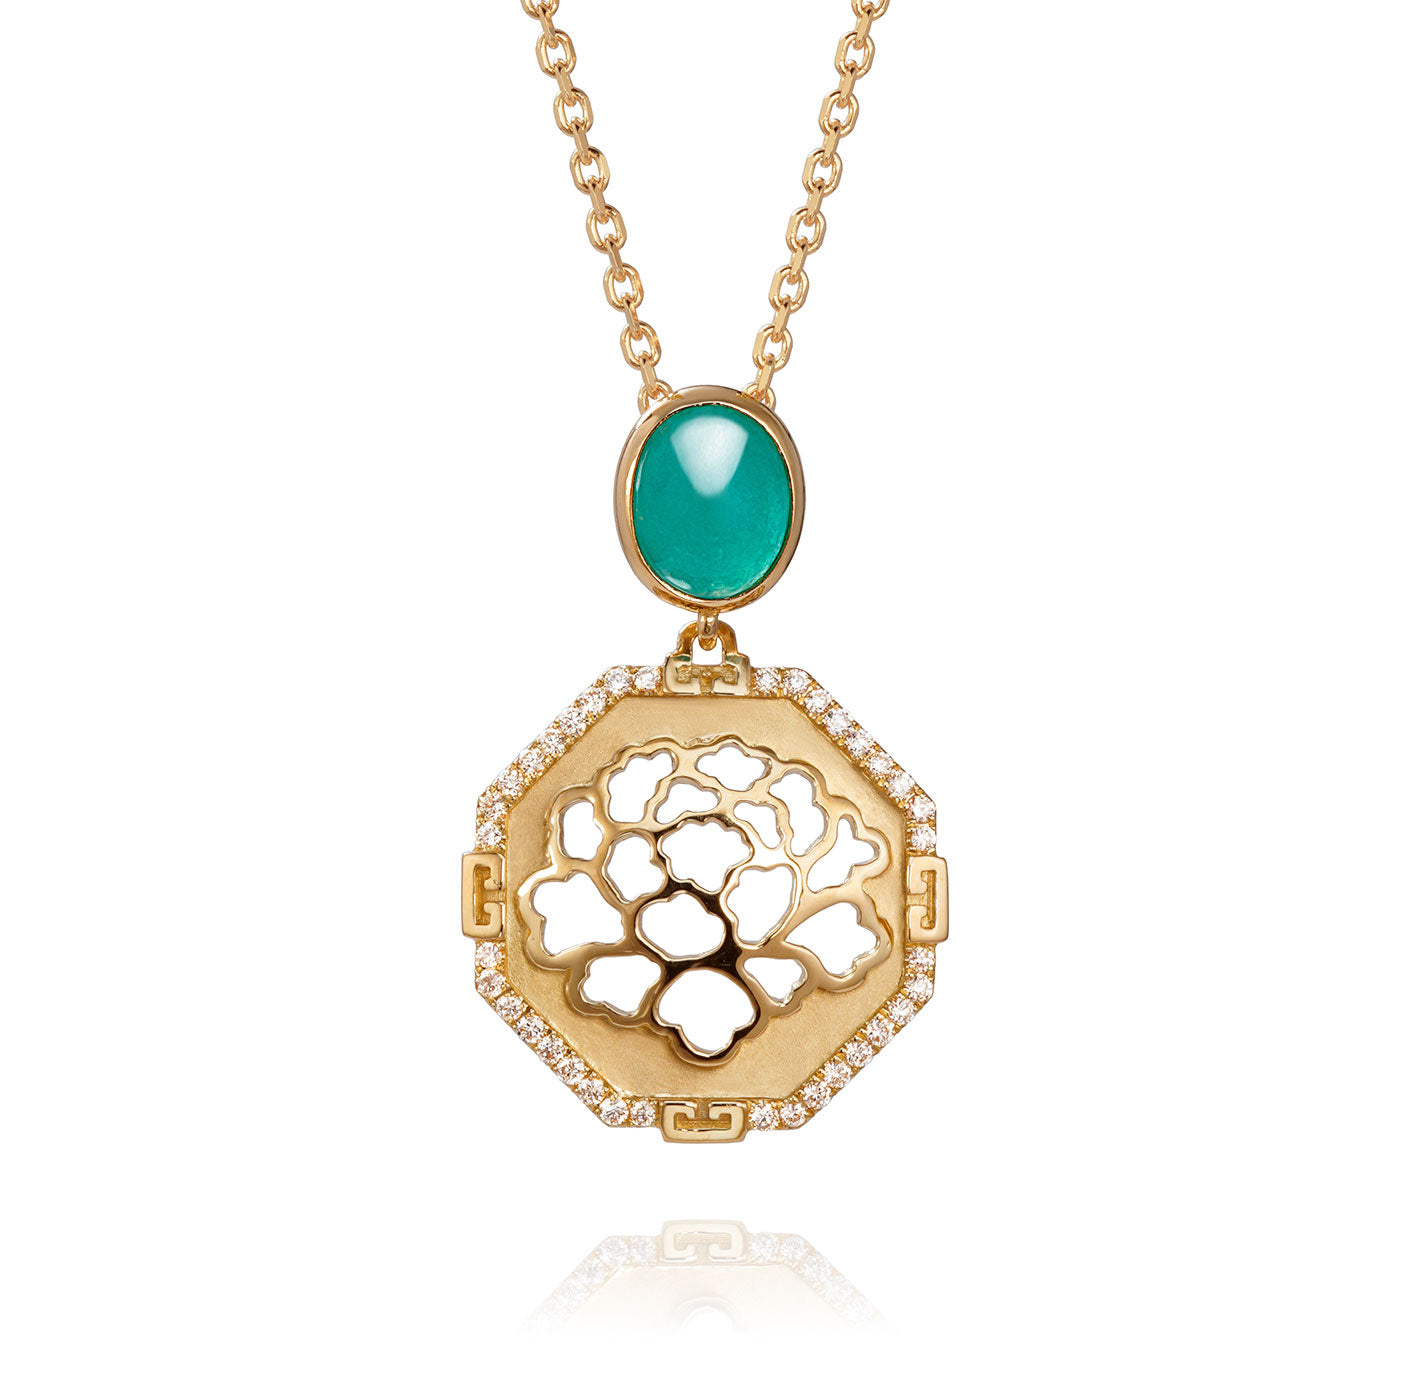 The Tang Elegance Necklace 18kt Yellow Gold with Blue Chalcedony Front View | Shen Yun Shop